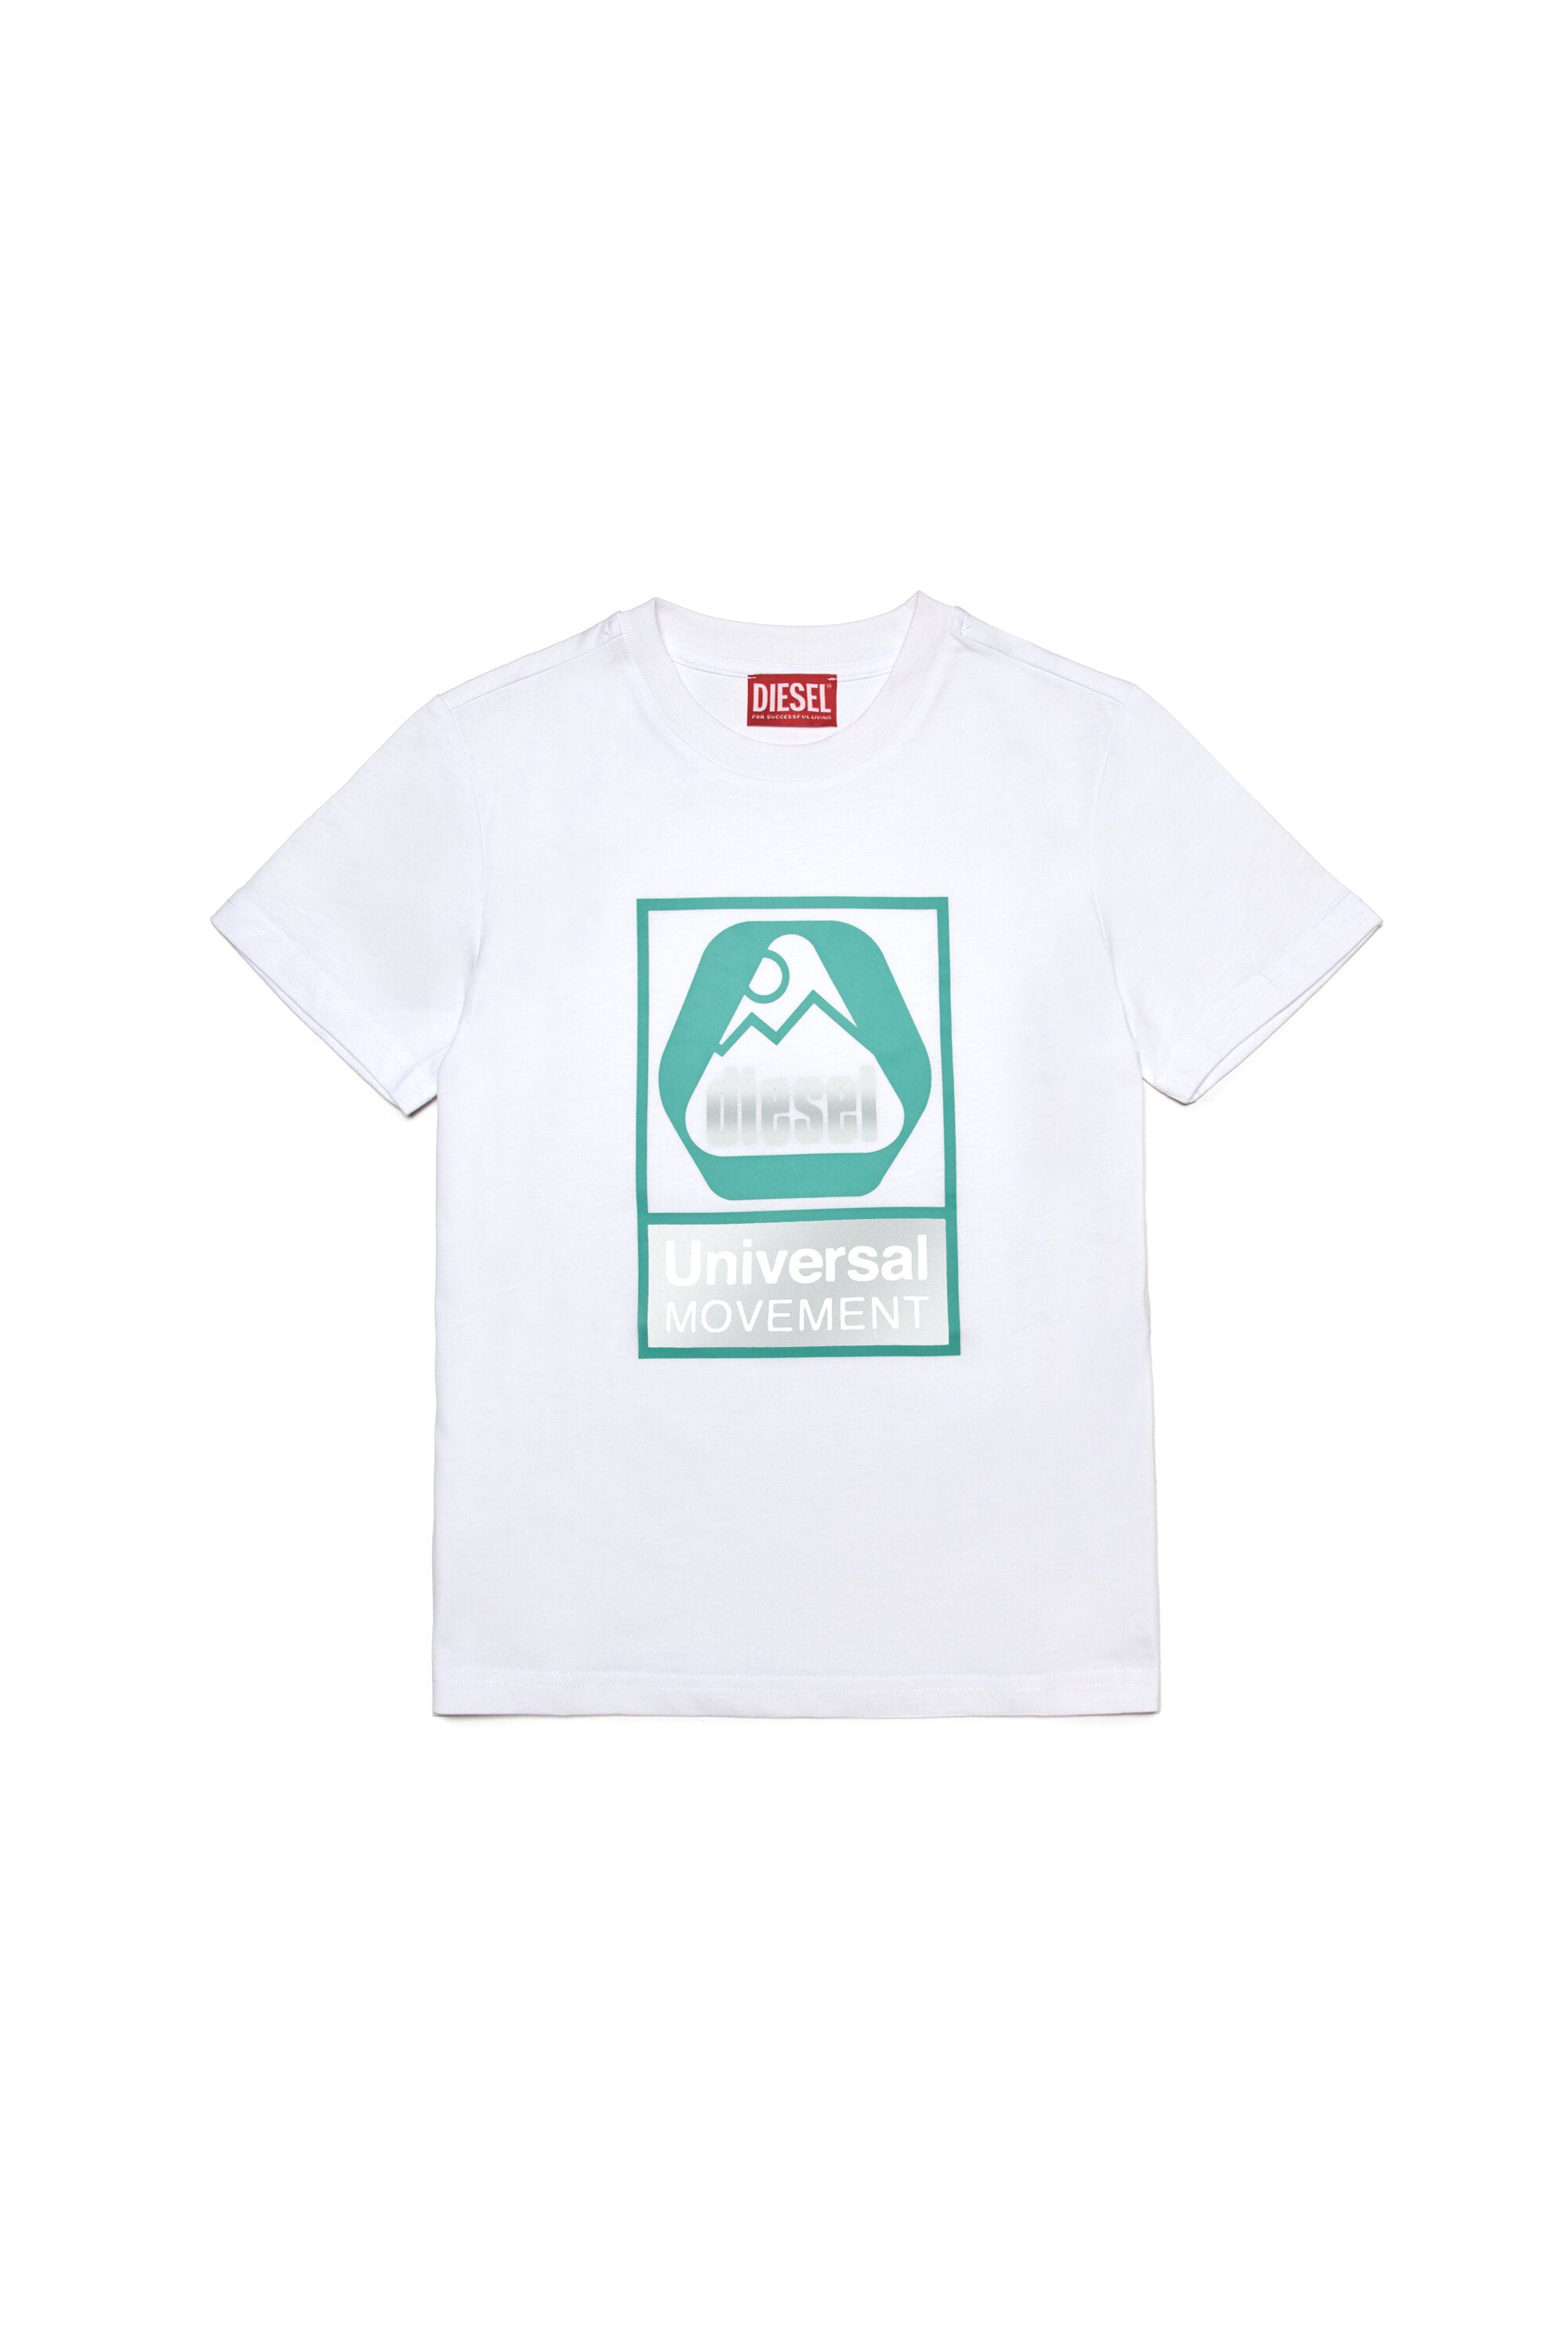 Crew-neck jersey T-shirt with reflective print Outdoor